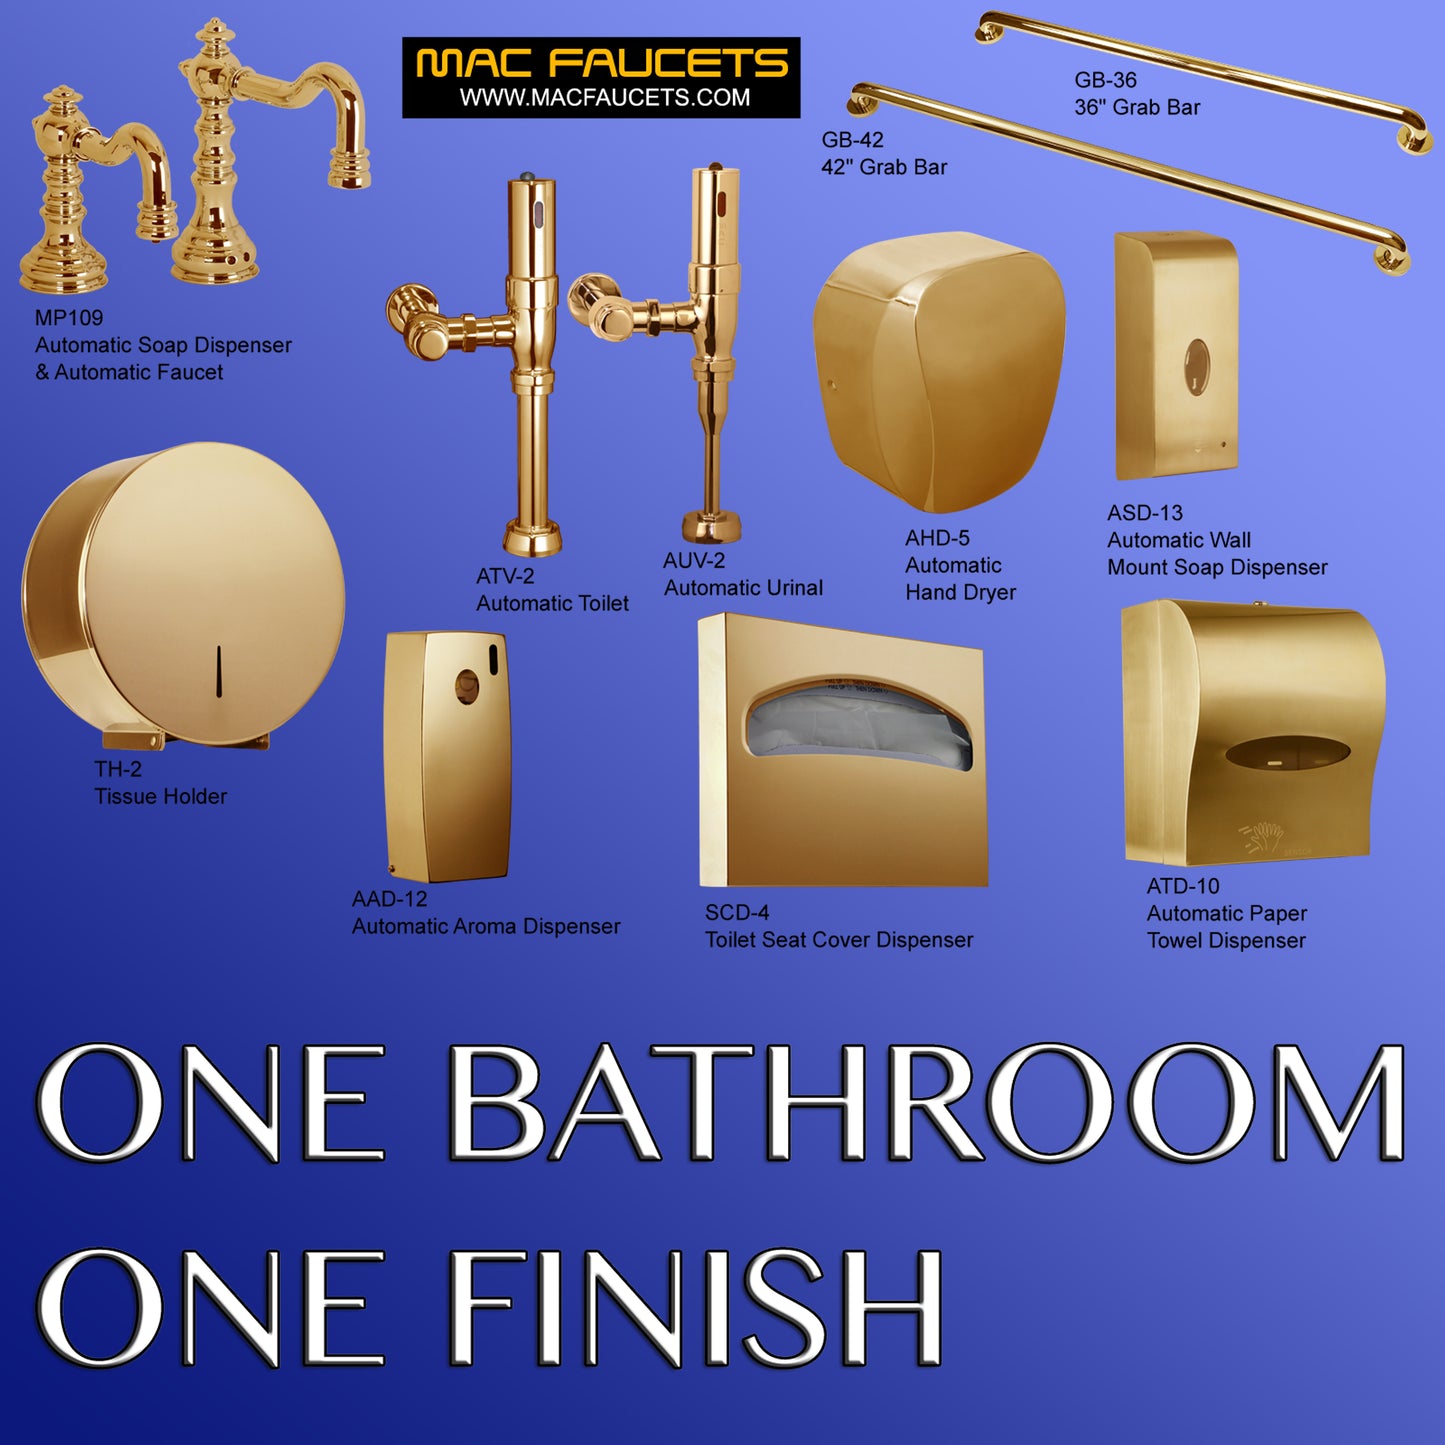 Automatic urinal, toilet flush valves, faucet and soap dispenser in Polished Gold